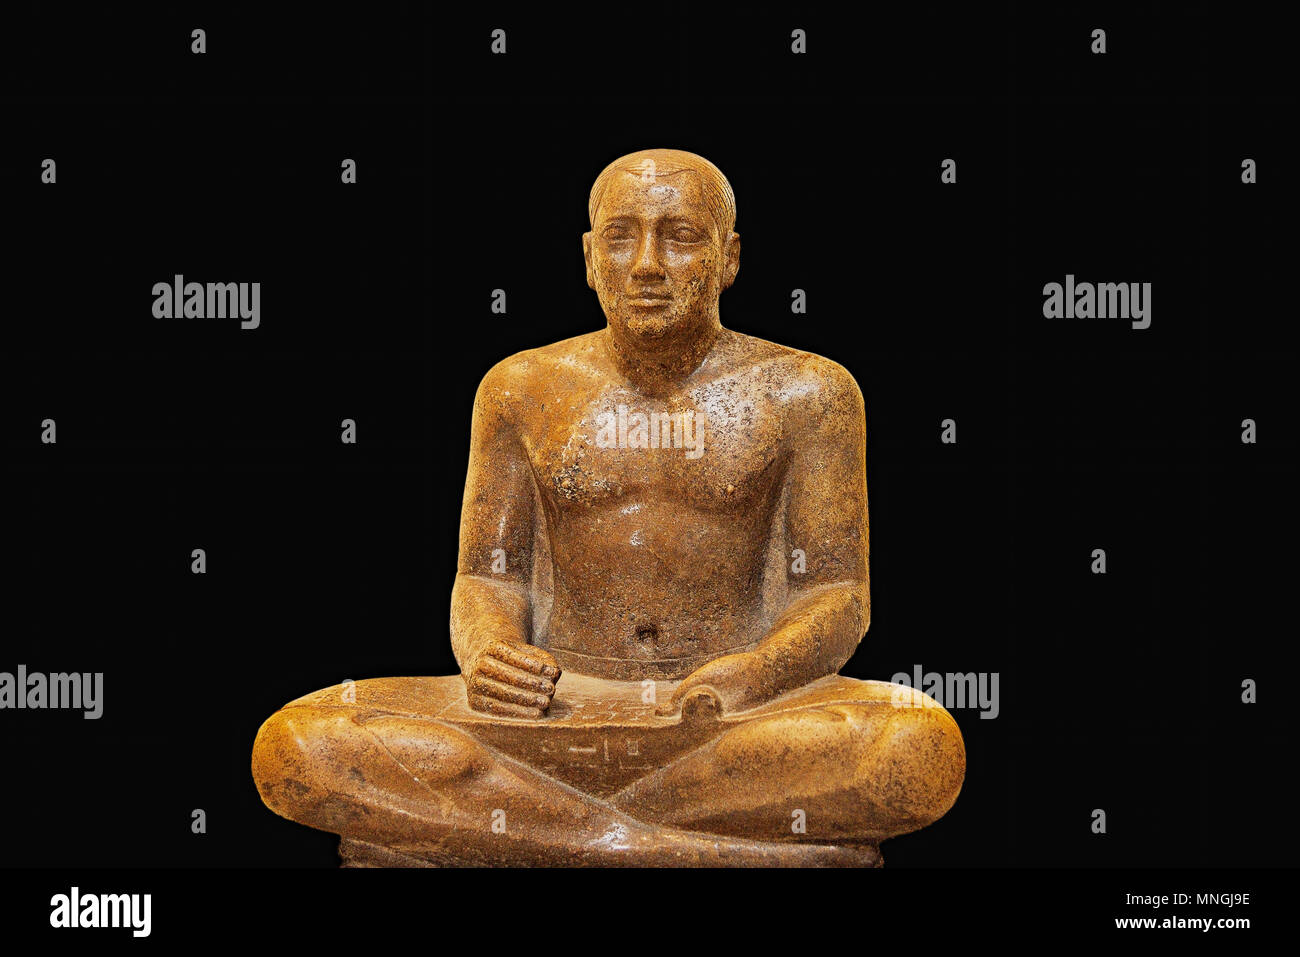 Ancient Egyptian Scribe statue in the Cairo Museum of Antiquities, Cairo, Egypt. Stock Photo